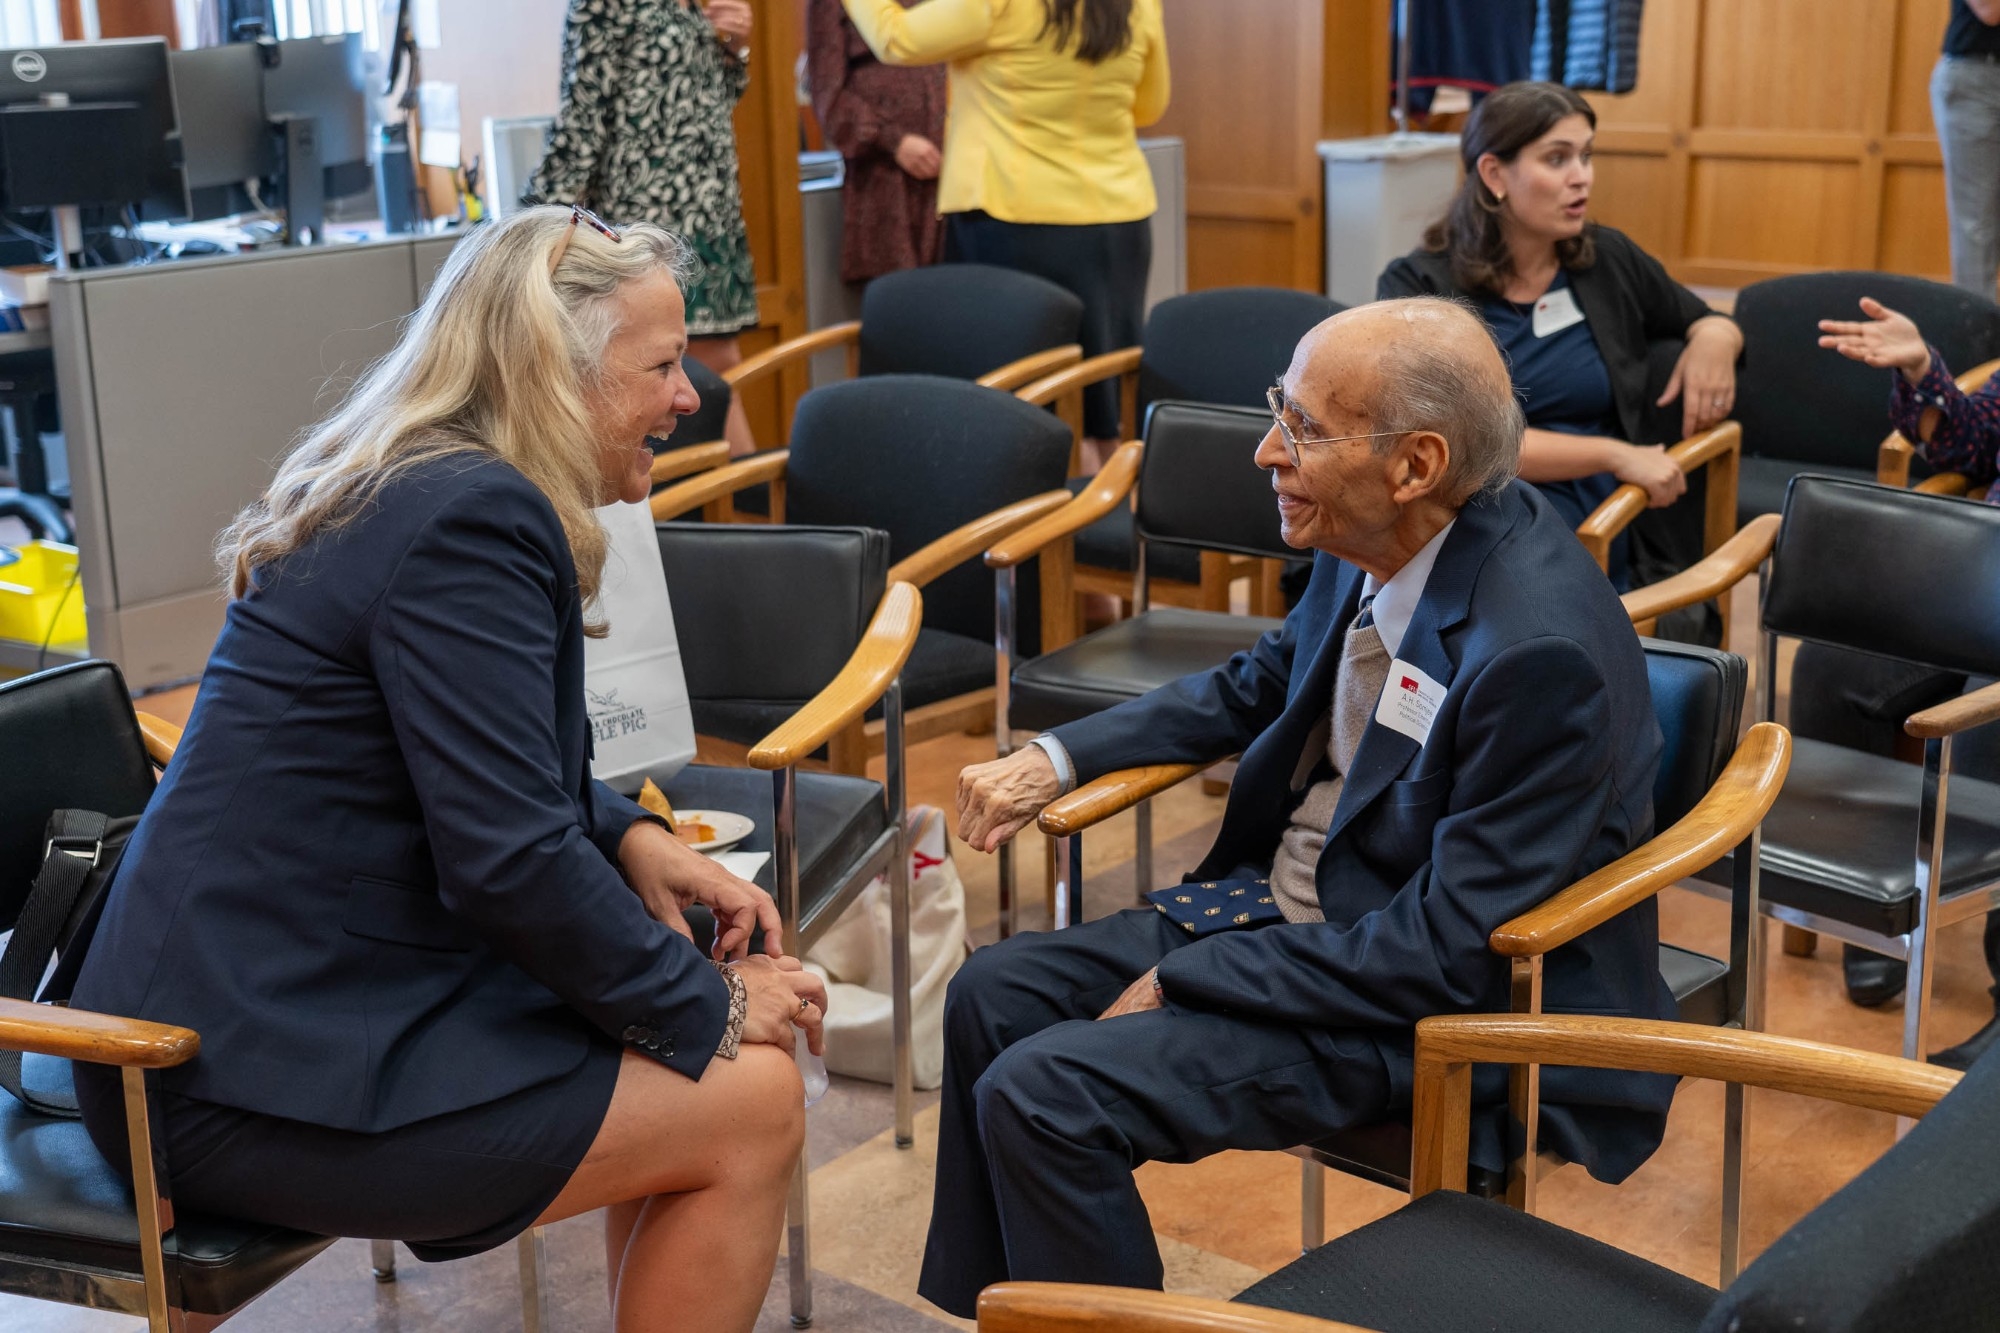 Laurel Weldon is candidly photographed next to Dr. A.H. Somjee. She is laughing and he is smiling at her in the photograph.